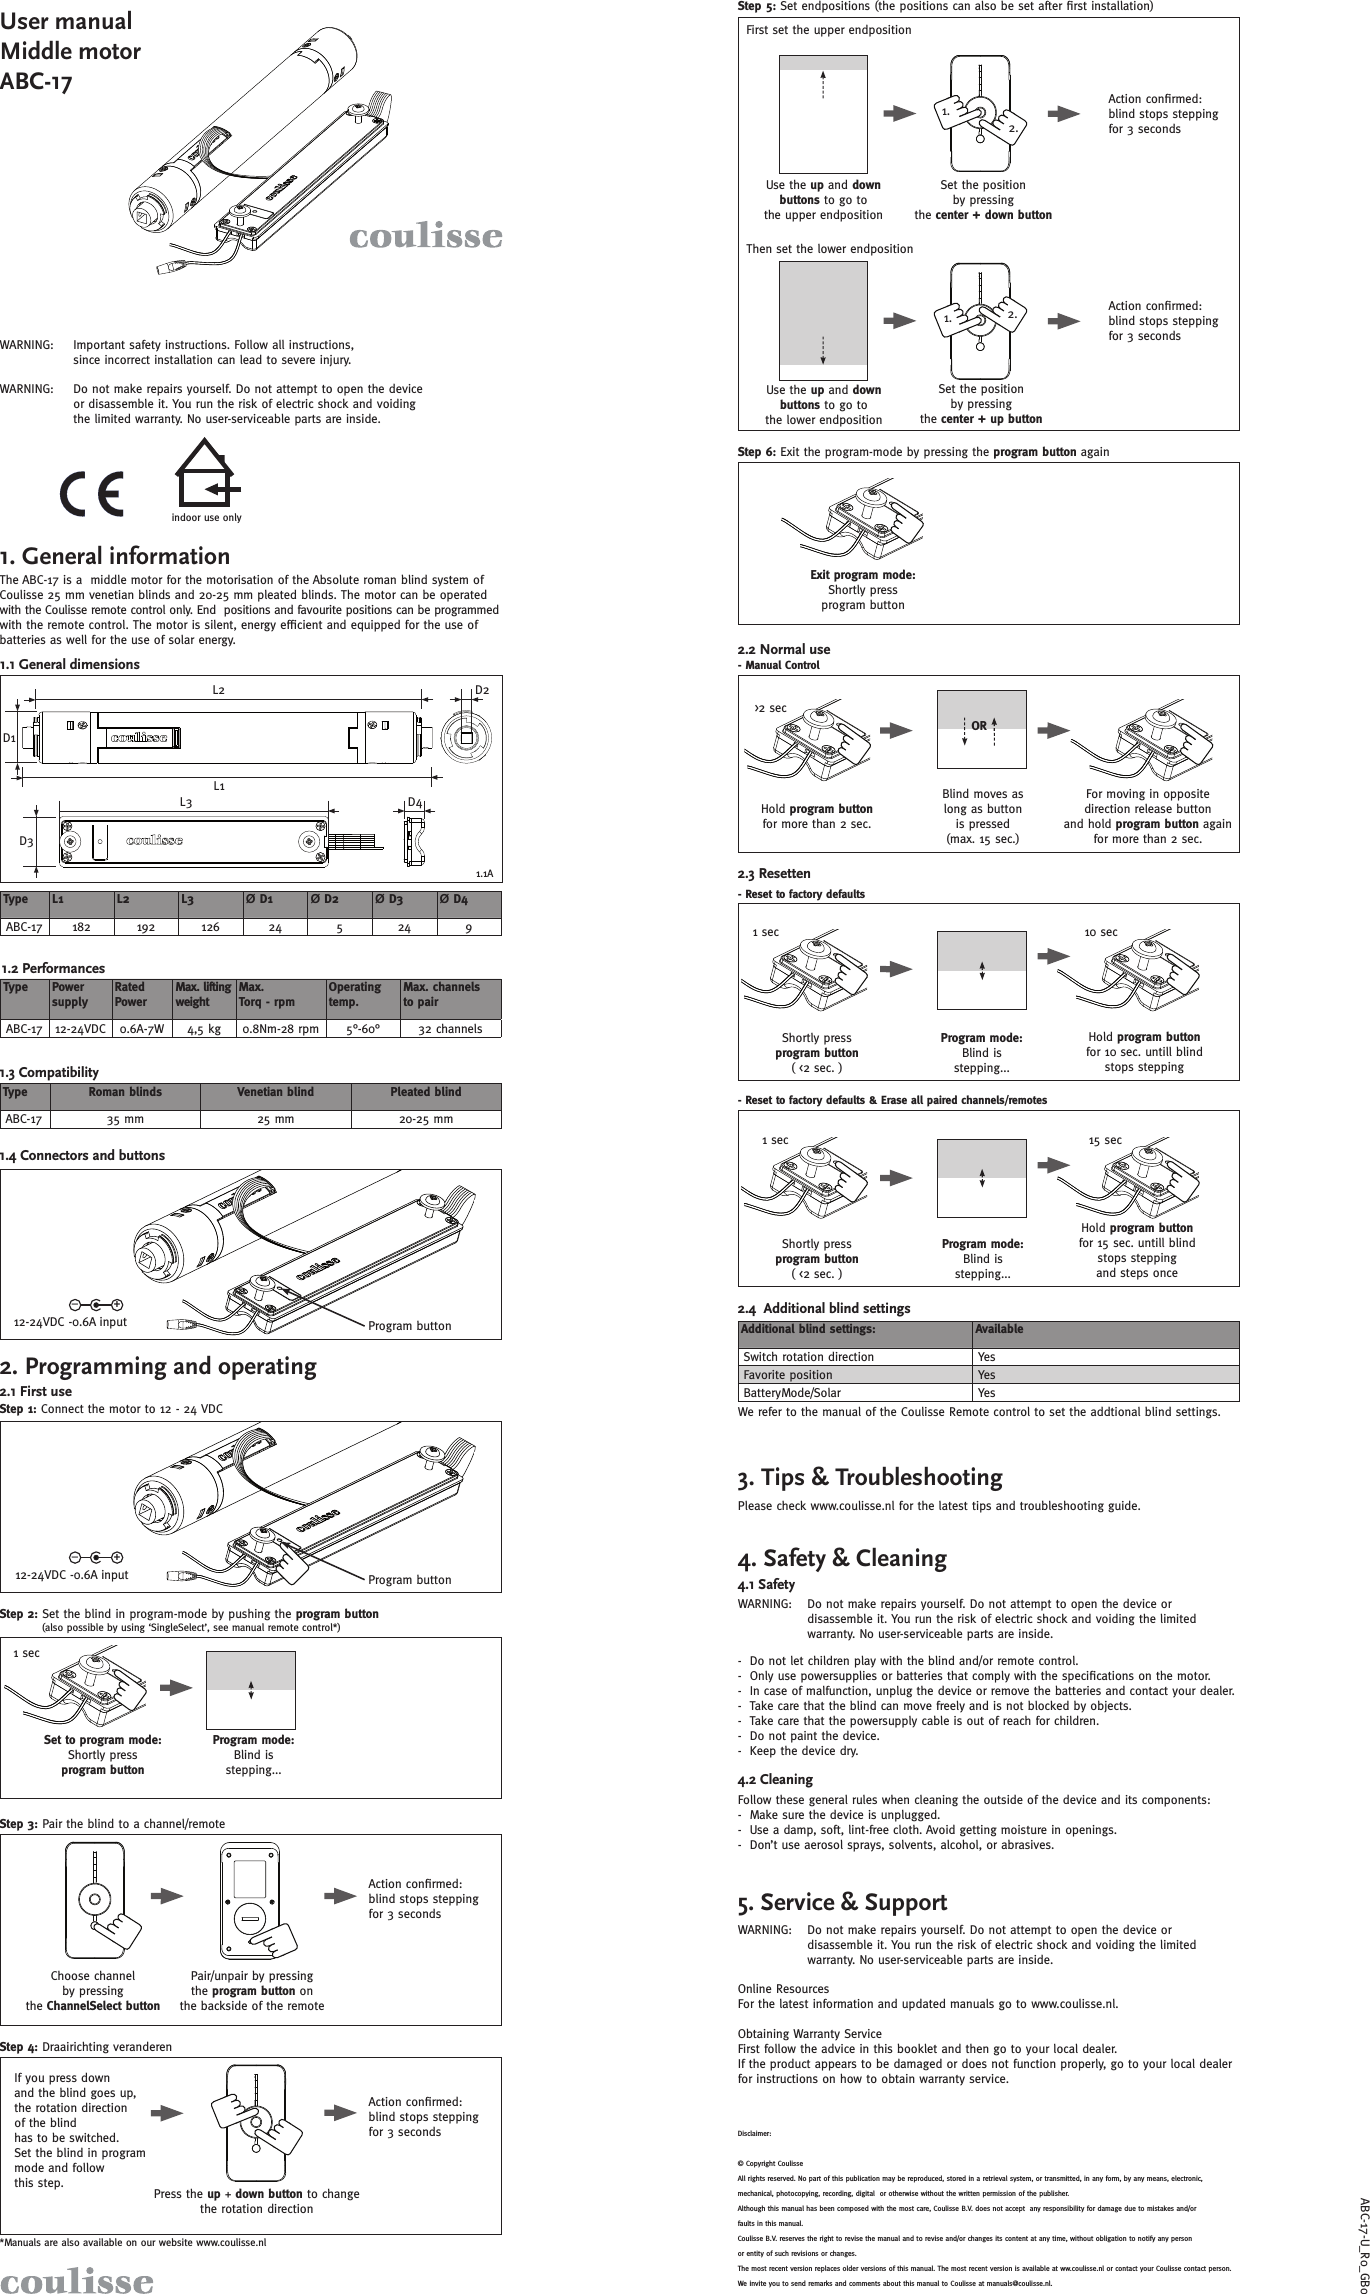 1.2.1. 2.indoor use onlyABC-17-U_R0_1.1AD1L1L2 D2D4L3D3-+-+User manual Middle motor ABC-171. General information1.1 General dimensionsThe ABC-17 is a  middle motor for the motorisation of the Absolute roman blind system of Coulisse 25 mm venetian blinds and 20-25 mm pleated blinds. The motor can be operated with the Coulisse remote control only. End  positions and favourite positions can be programmed with the remote control. The motor is silent, energy efﬁ cient and equipped for the use of batteries as well for the use of solar energy. WARNING:  Important safety instructions. Follow all instructions, since incorrect installation can lead to severe injury.Do not make repairs yourself. Do not attempt to open the device or disassemble it. You run the risk of electric shock and voiding the limited warranty. No user-serviceable parts are inside.WARNING: 1.2 Performances1.3 Compatibility1.4 Connectors and buttonsProgram button12-24VDC -0.6A input2. Programming and operating2.1 First useStep 1: Connect the motor to 12 - 24 VDC(also possible by using ‘SingleSelect’, see manual remote control*)*Manuals are also available on our website www.coulisse.nlStep 2: Set the blind in program-mode by pushing the program buttonStep 3: Pair the blind to a channel/remoteChoose channel by pressing the ChannelSelect buttonPair/unpair by pressing the program button on the backside of the remotePress the up + down button to change the rotation directionStep 4: Draairichting veranderenSet to program mode:Shortly press program button Program mode:Blind is stepping...1 secAction conﬁ rmed: blind stops stepping for 3 secondsAction conﬁ rmed: blind stops stepping for 3 secondsIf you press down and the blind goes up, the rotation direction of the blind has to be switched. Set the blind in program mode and follow this step.We refer to the manual of the Coulisse Remote control to set the addtional blind settings.2.4  Additional blind settings5. Service &amp; Support4.2 CleaningFollow these general rules when cleaning the outside of the device and its components:-  Make sure the device is unplugged.-  Use a damp, soft, lint-free cloth. Avoid getting moisture in openings.-  Don’t use aerosol sprays, solvents, alcohol, or abrasives.Do not make repairs yourself. Do not attempt to open the device or disassemble it. You run the risk of electric shock and voiding the limited warranty. No user-serviceable parts are inside.WARNING: Do not make repairs yourself. Do not attempt to open the device or disassemble it. You run the risk of electric shock and voiding the limited warranty. No user-serviceable parts are inside.WARNING: -  Do not let children play with the blind and/or remote control.-  Only use powersupplies or batteries that comply with the speciﬁ cations on the motor.-  In case of malfunction, unplug the device or remove the batteries and contact your dealer.-  Take care that the blind can move freely and is not blocked by objects.-  Take care that the powersupply cable is out of reach for children.-  Do not paint the device.-  Keep the device dry.Online ResourcesFor the latest information and updated manuals go to www.coulisse.nl.Obtaining Warranty ServiceFirst follow the advice in this booklet and then go to your local dealer. If the product appears to be damaged or does not function properly, go to your local dealer for instructions on how to obtain warranty service.3. Tips &amp; TroubleshootingPlease check www.coulisse.nl for the latest tips and troubleshooting guide.Disclaimer:© Copyright CoulisseAll rights reserved. No part of this publication may be reproduced, stored in a retrieval system, or transmitted, in any form, by any means, electronic, mechanical, photocopying, recording, digital  or otherwise without the written permission of the publisher.Although this manual has been composed with the most care, Coulisse B.V. does not accept  any responsibility for damage due to mistakes and/or faults in this manual.Coulisse B.V. reserves the right to revise the manual and to revise and/or changes its content at any time, without obligation to notify any person or entity of such revisions or changes.The most recent version replaces older versions of this manual. The most recent version is available at ww.coulisse.nl or contact your Coulisse contact person.We invite you to send remarks and comments about this manual to Coulisse at manuals@coulisse.nl.Shortly press program button ( &lt;2 sec. )Program mode:Blind is stepping...- Reset to factory defaults &amp; Erase all paired channels/remotesHold program button for 10 sec. untill blind stops stepping2.2 Normal use- Manual ControlHold program button for more than 2 sec. Blind moves as long as button is pressed (max. 15 sec.)For moving in opposite direction release button and hold program button again for more than 2 sec.2.3 ResettenShortly press program button ( &lt;2 sec. )Program mode:Blind is stepping...- Reset to factory defaultsHold program button for 15 sec. untill blind stops stepping and steps once1 sec 15 secStep 6: Exit the program-mode by pressing the program button againThen set the lower endpositionStep 5: Set endpositions (the positions can also be set after ﬁ rst installation)Use the up and down buttons to go to the lower endpositionSet the position by pressing the center + up buttonAction conﬁ rmed: blind stops stepping for 3 secondsAction conﬁ rmed: blind stops stepping for 3 secondsExit program mode: Shortly press program button1 sec 10 sec&gt;2 sec     Type Power supplyRated PowerMax. lifting weight Max. Torq - rpmOperating temp.Max. channels to pairABC-17 12-24VDC  0.6A-7W 4,5 kg 0.8Nm-28 rpm 5°-60° 32 channels     Type Roman blinds Venetian blind Pleated blindABC-17 35 mm 25 mm 20-25 mmOR     Additional blind settings: Available Switch rotation direction YesFavorite position YesBatteryMode/Solar Yes4. Safety &amp; CleaningUse the up and down buttons to go to the upper endpositionSet the position by pressing the center + down buttonFirst set the upper endposition     Type L1 L2 L3 Ø D1 Ø D2 Ø D3 Ø D4ABC-17 182 192 126 24 5 24 94.1 Safety GB0Program button12-24VDC -0.6A input